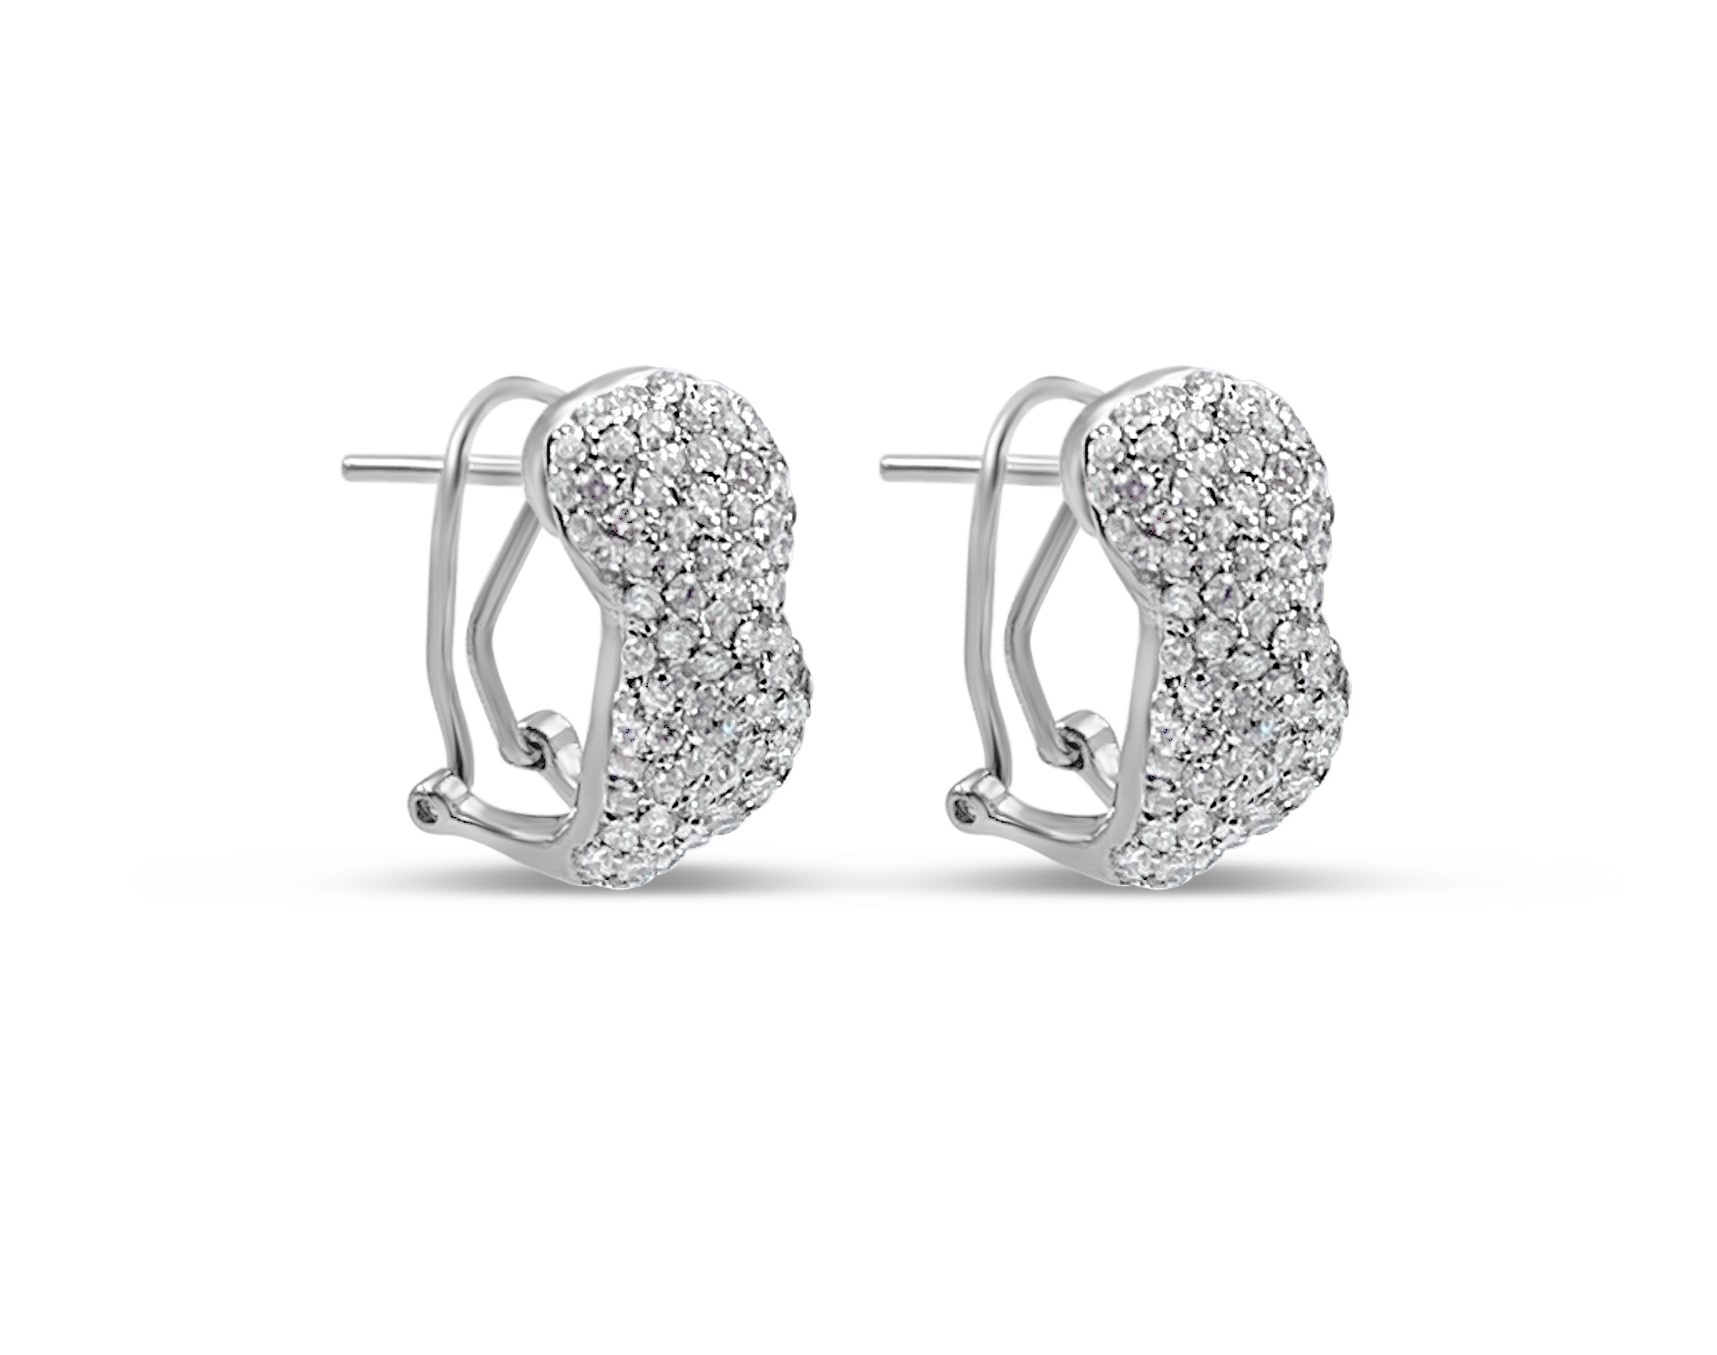 18k white gold earrings with 3,52ct diamonds